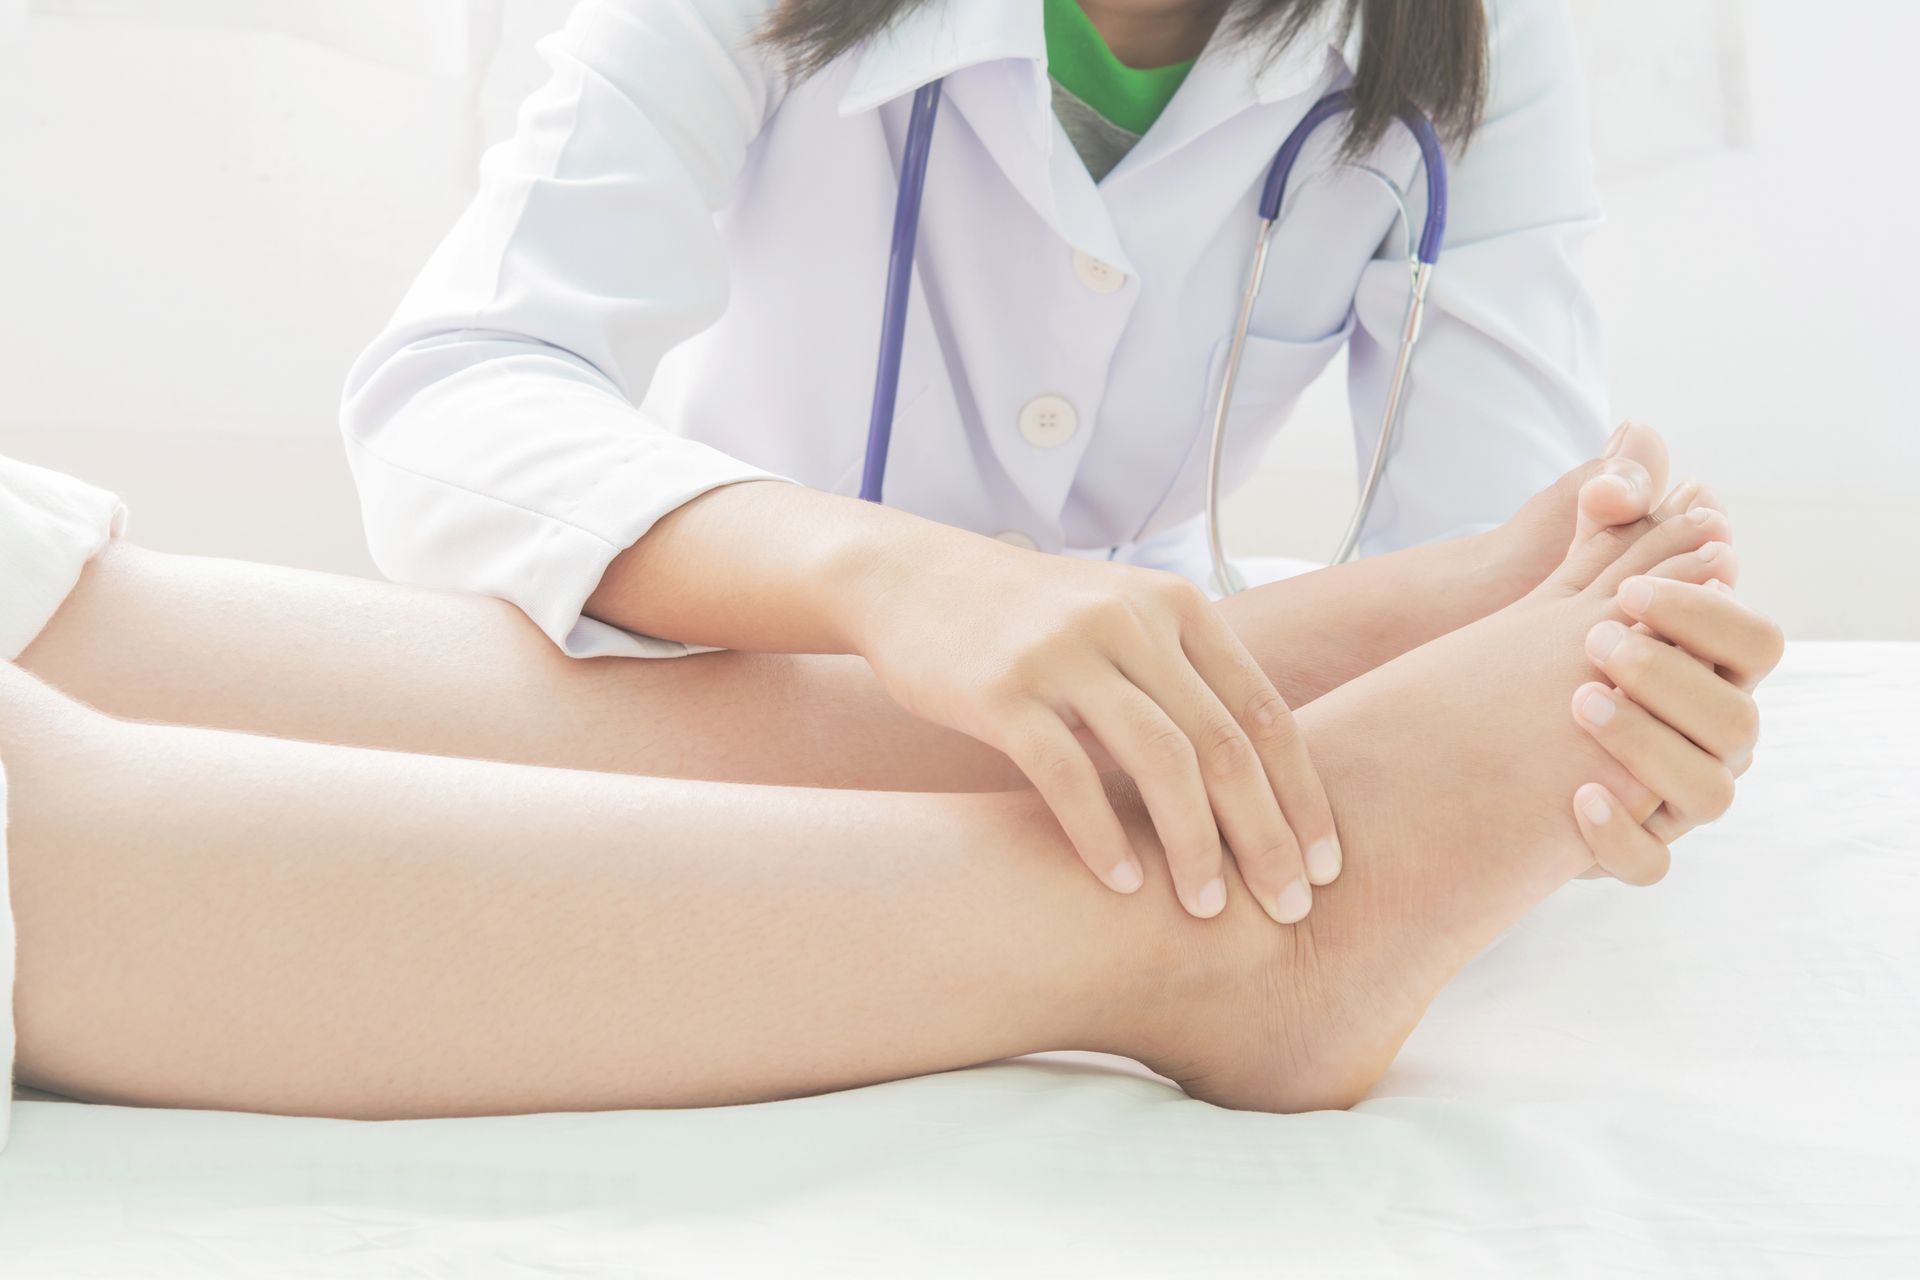 a doctor is examining a patient's leg on a bed, experiencing swelling after an injury